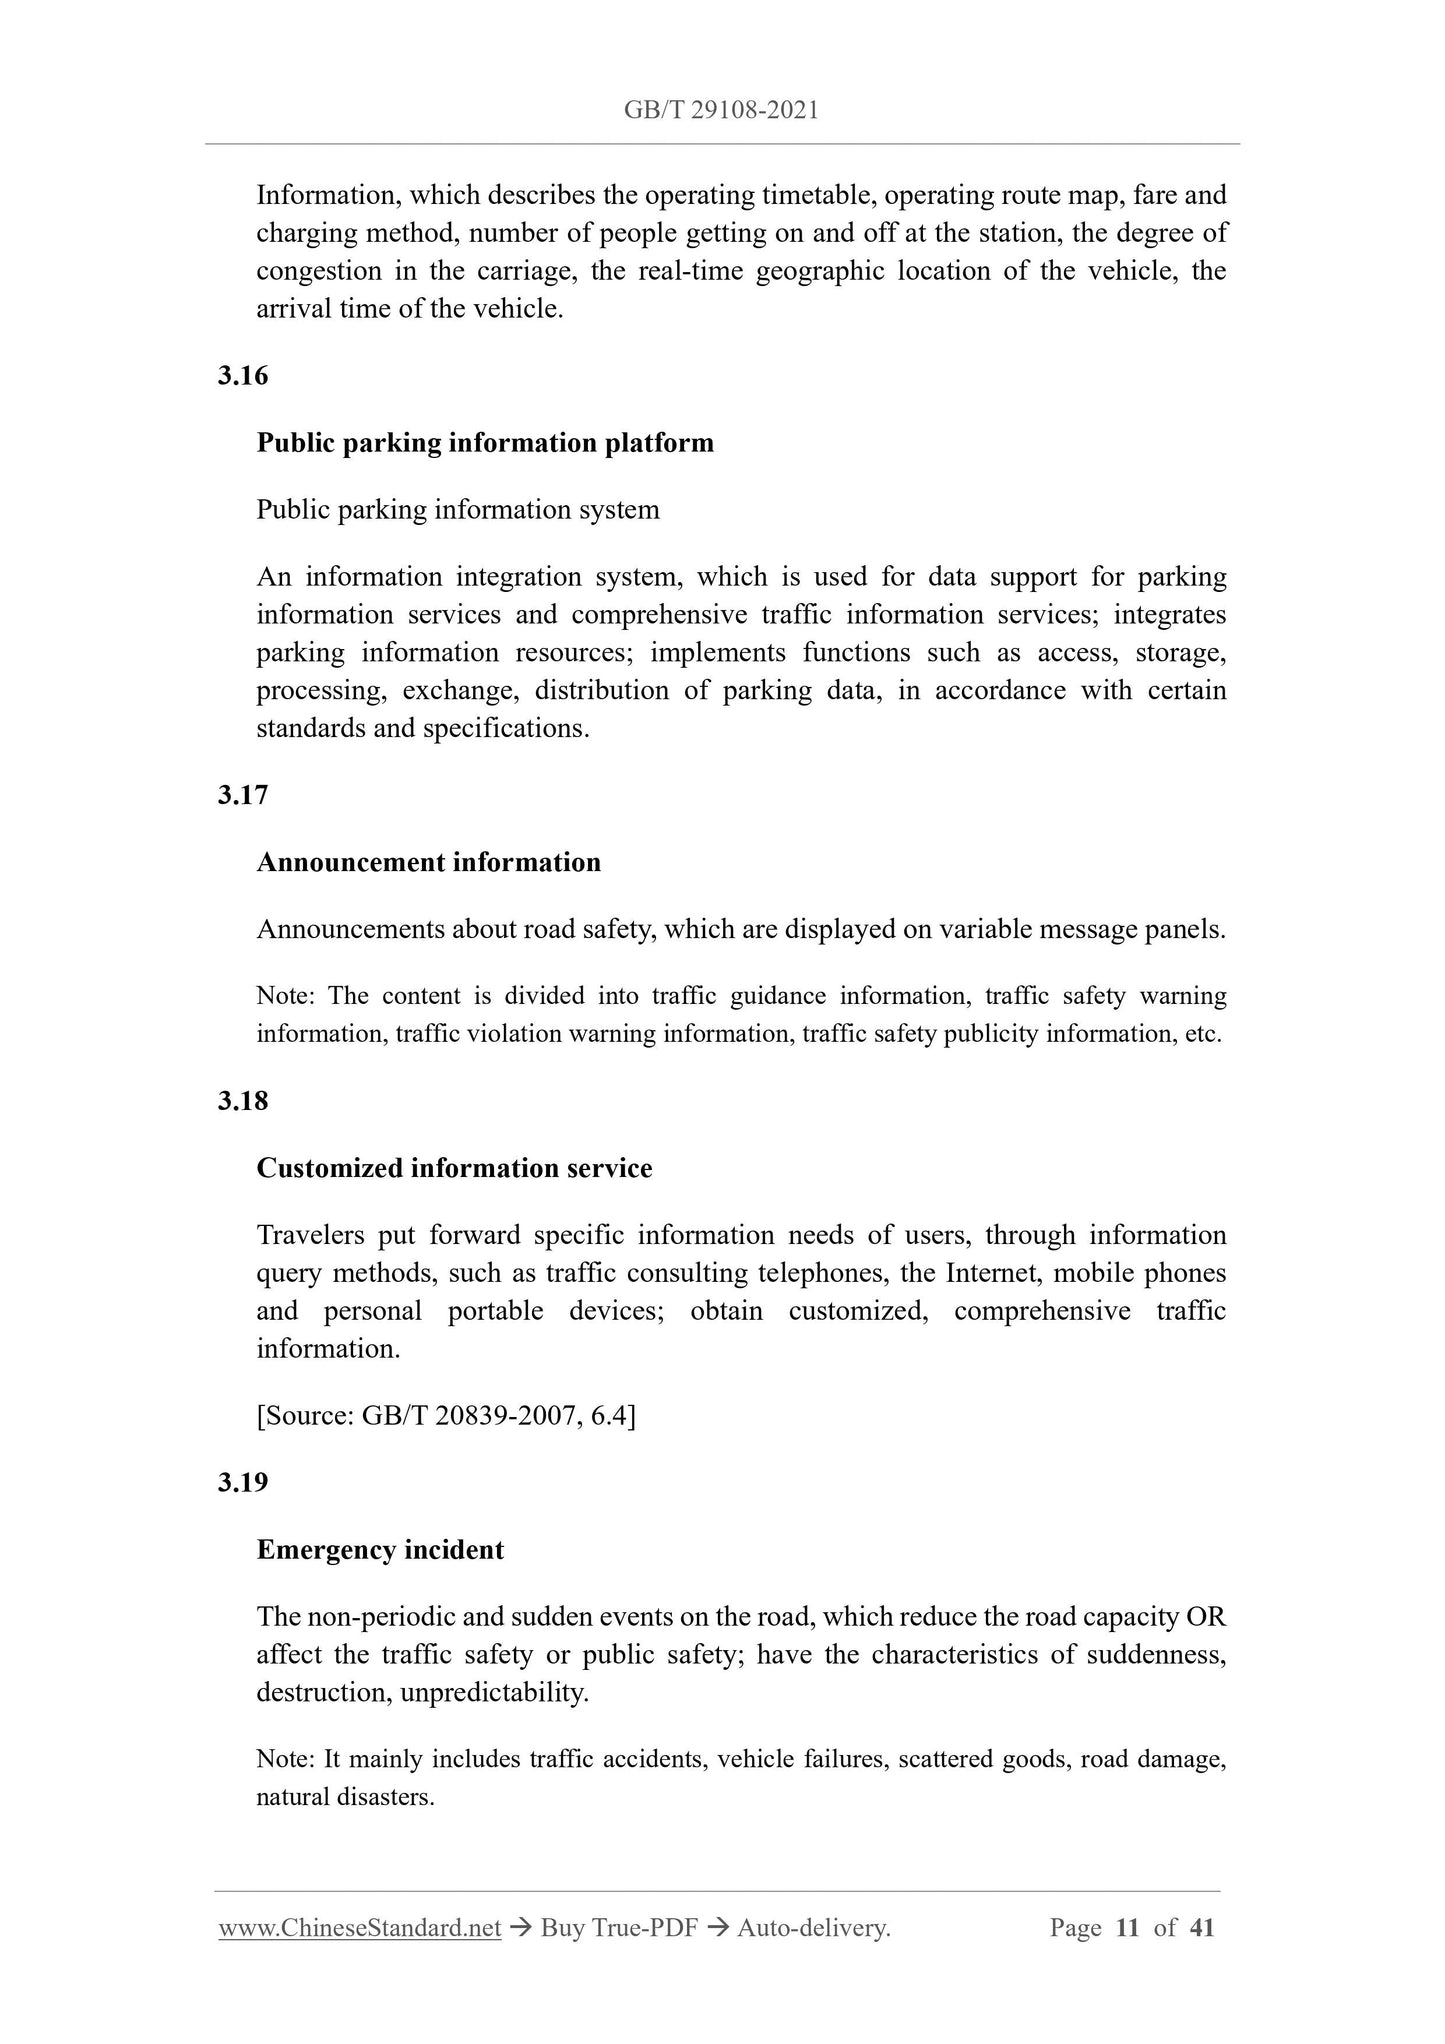 GB/T 29108-2021 Page 5